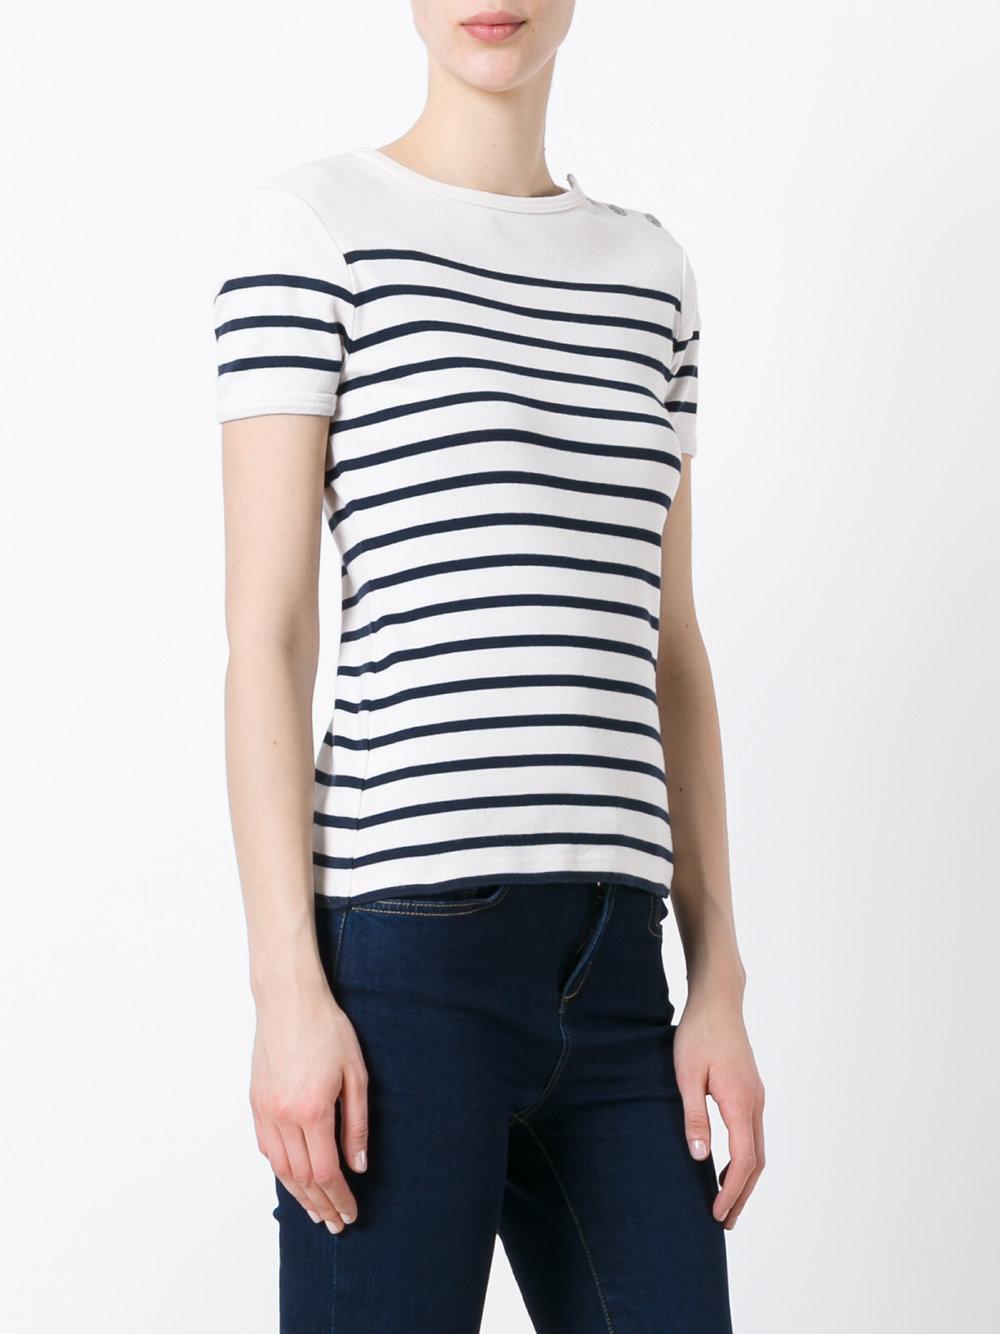 Jean Paul Gaultier Sailor Striped T-shirt in White | Lyst